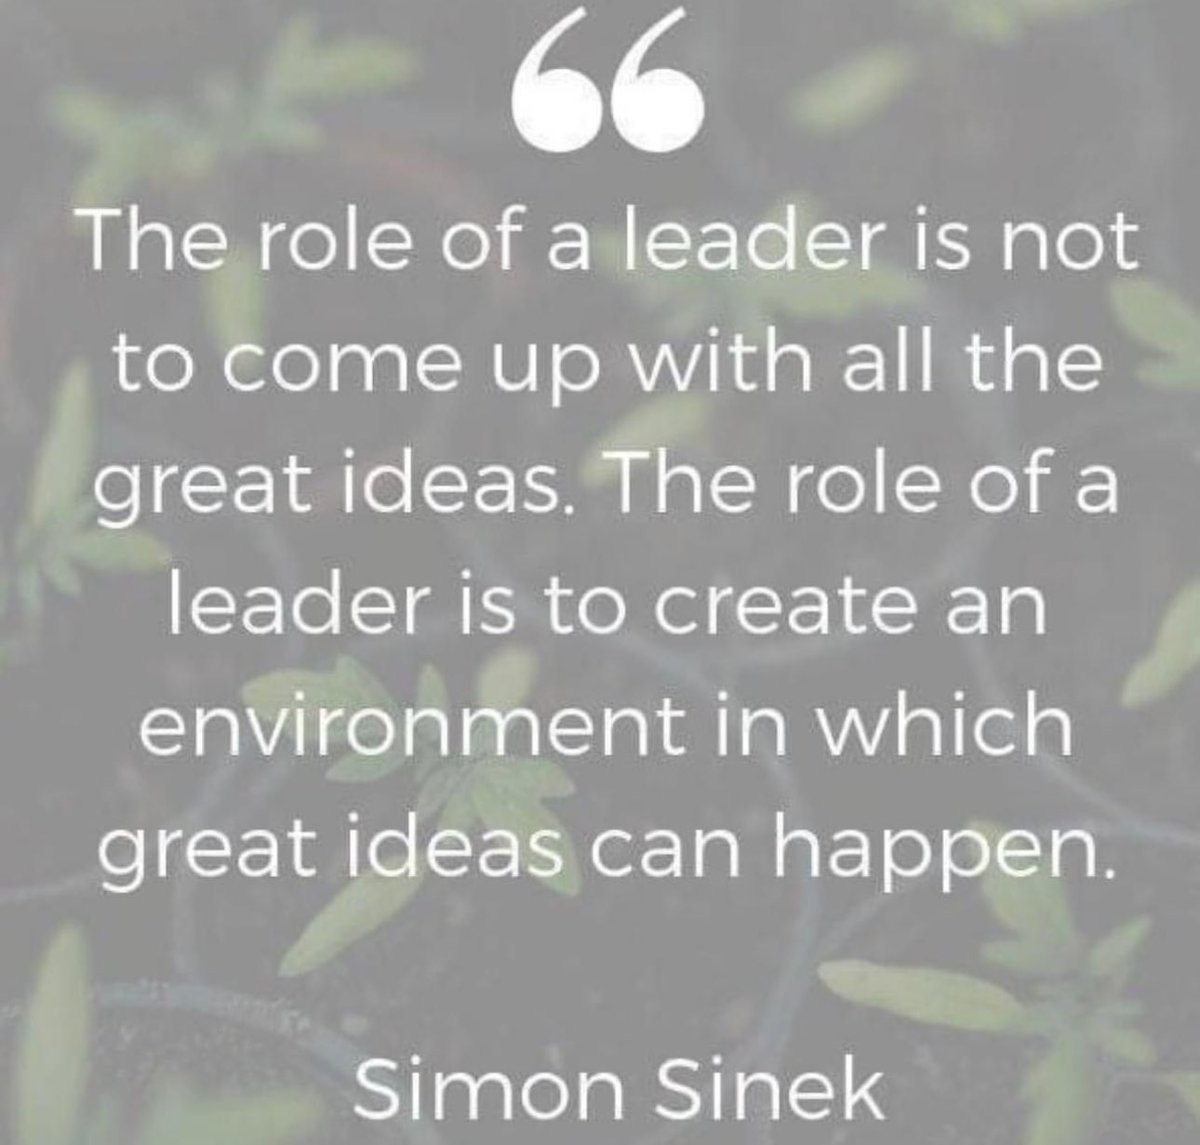 Authentic leadership isn’t about having all the answers; it’s about nurturing an atmosphere where every voice is heard and great ideas can flourish. Surround yourself with innovative thinkers and people who challenge your thinking but share your common goal. #LeadWithMe